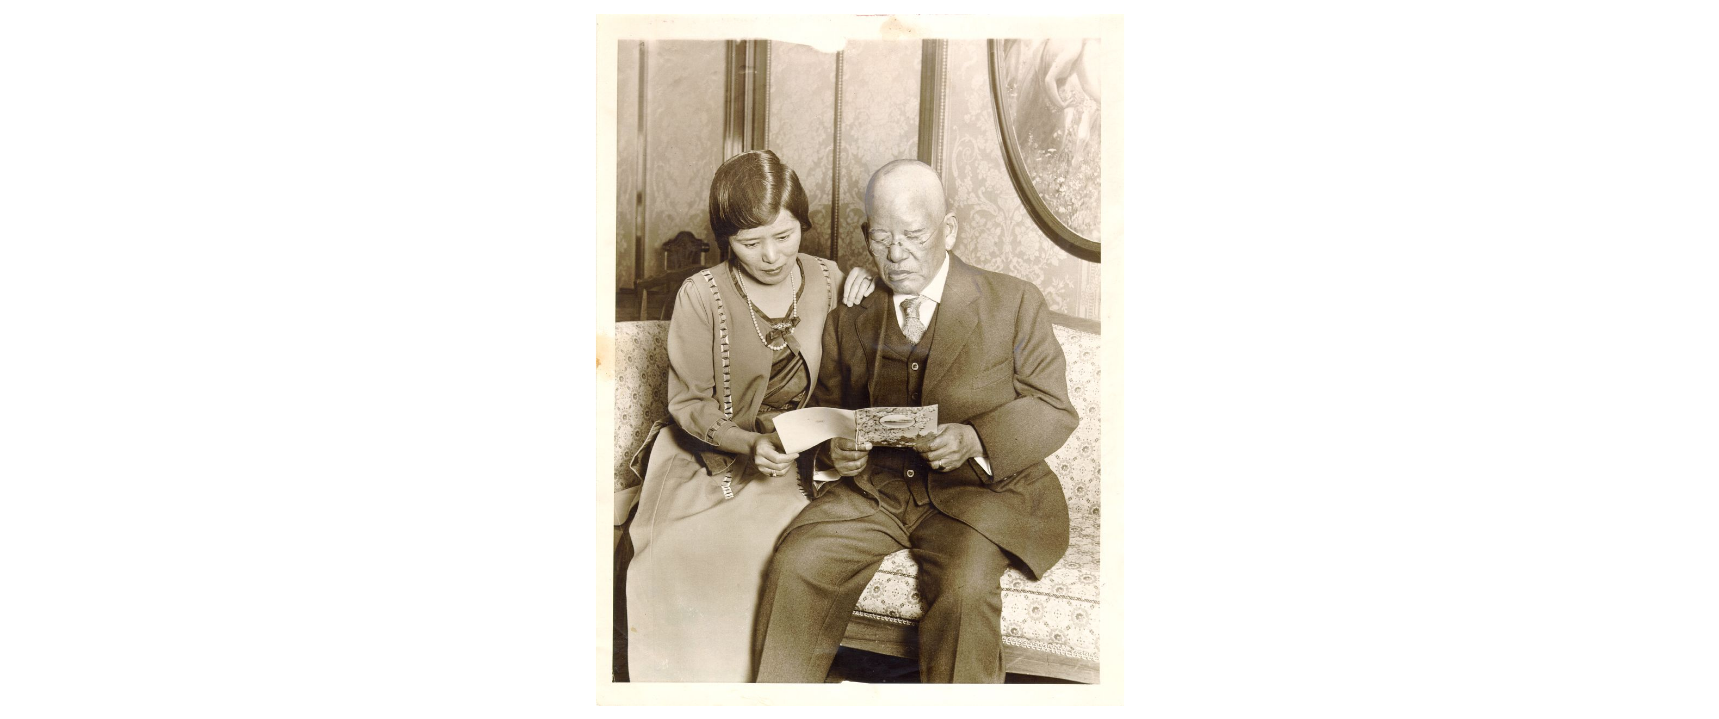 Black and white photo of an older Asian man in a suit looking at a card. A younger Asian woman reads over his shoulder. They are dressed in clothes typical of the early 20th century.